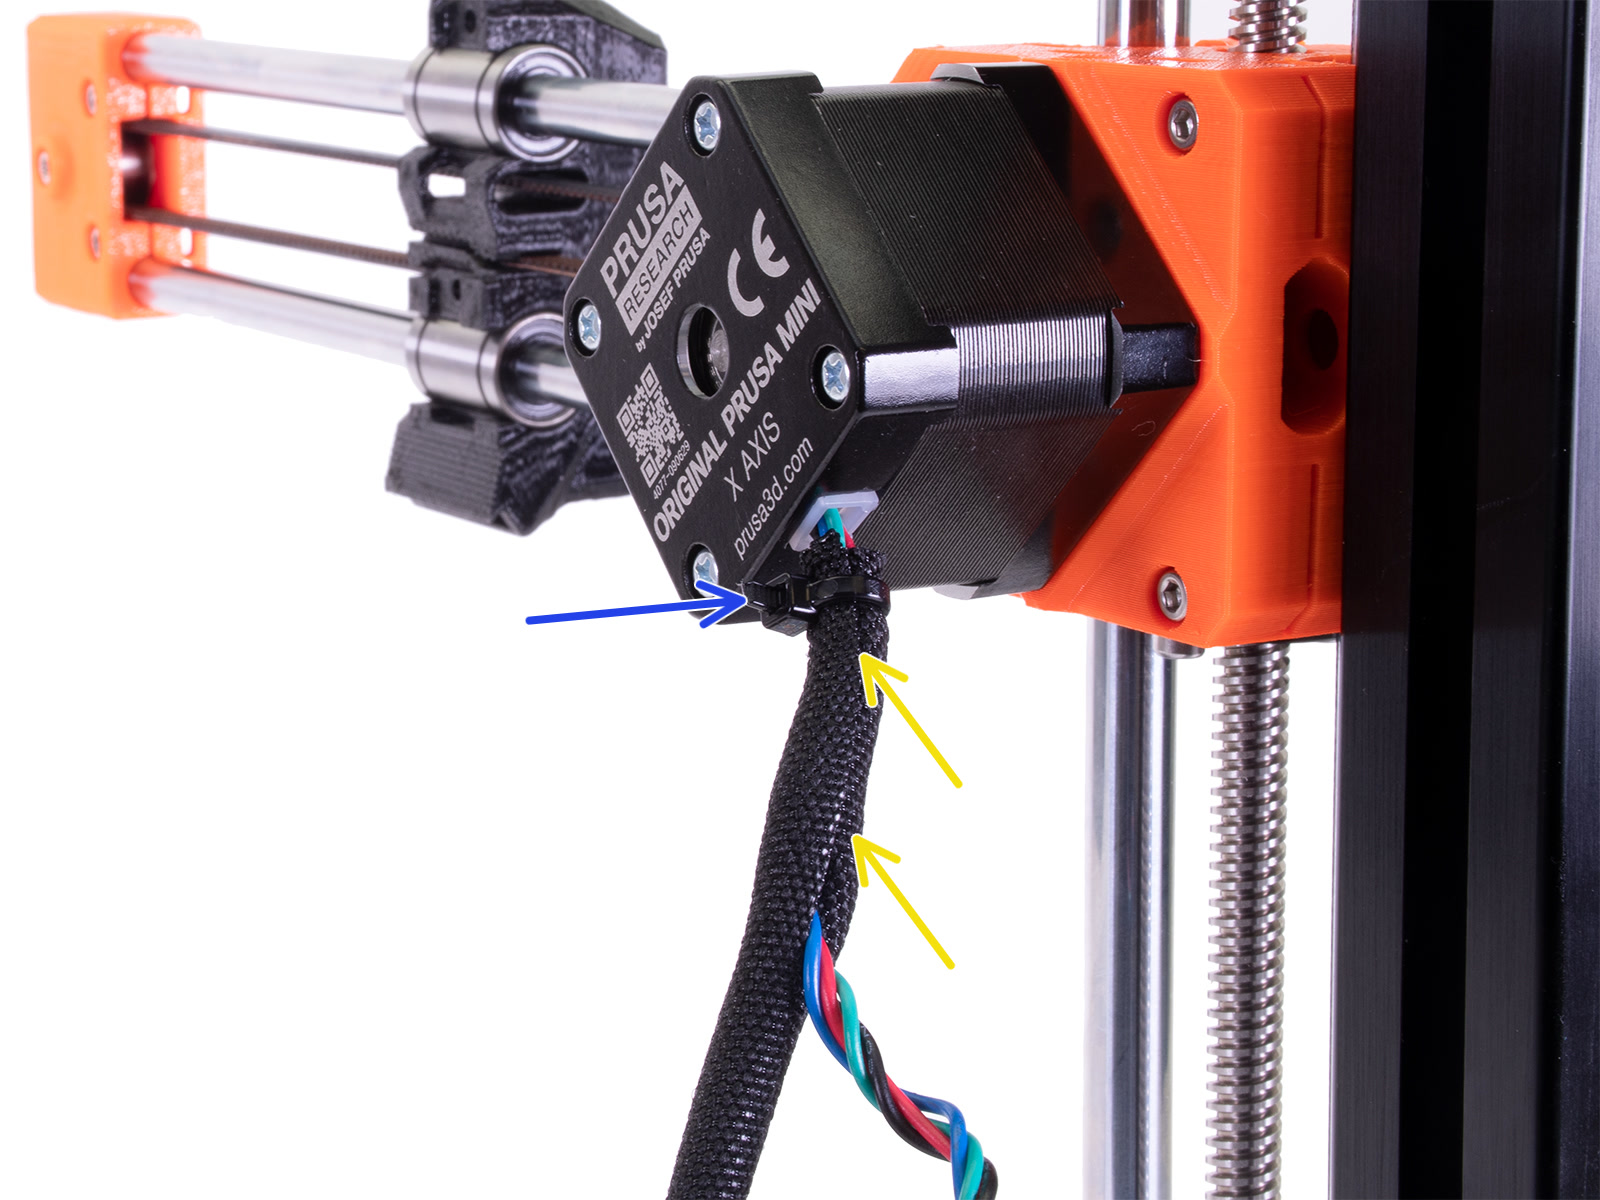 Guiding the X-axis motor cable